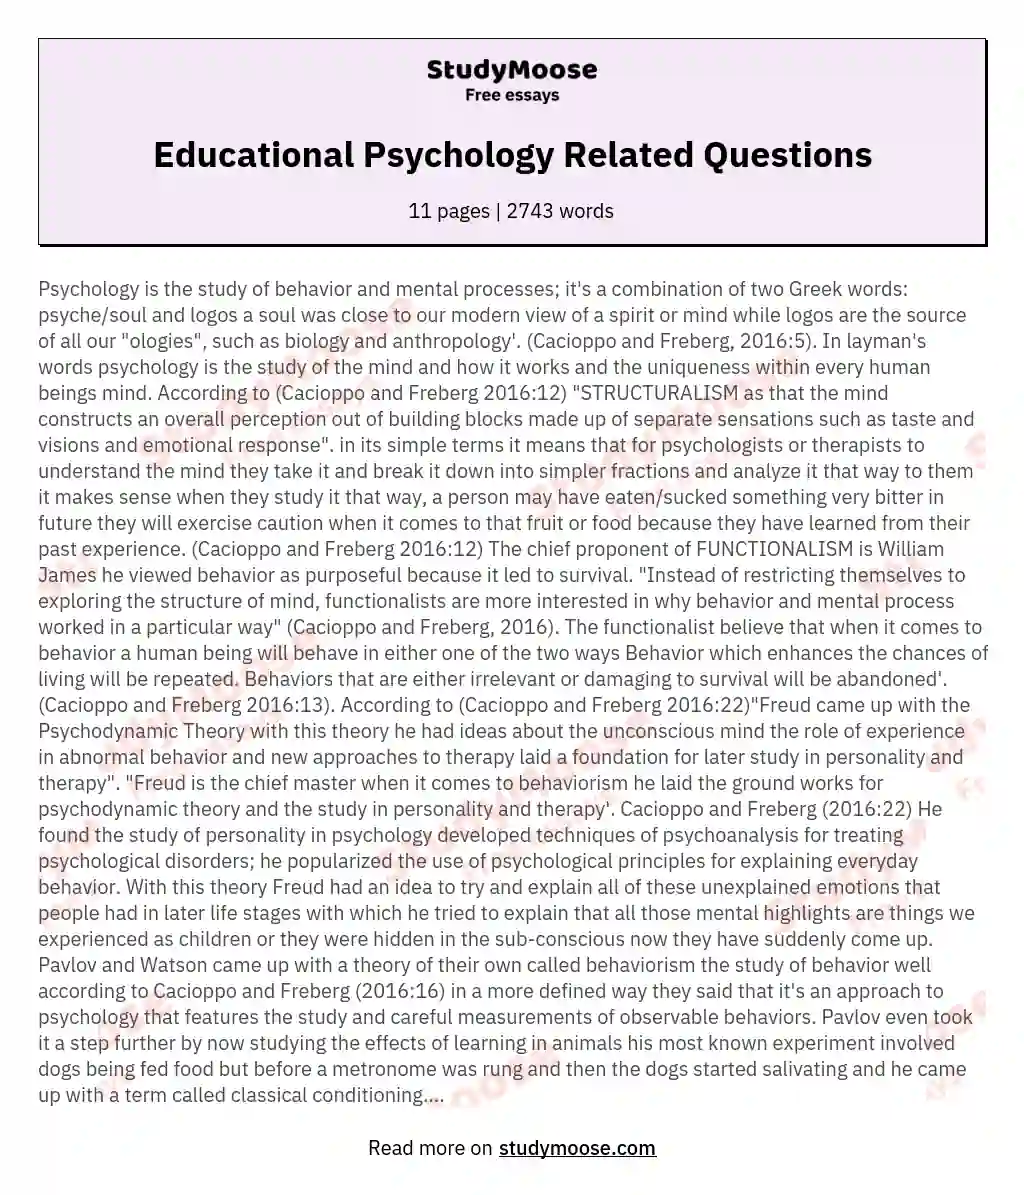 Educational Psychology Related Questions essay